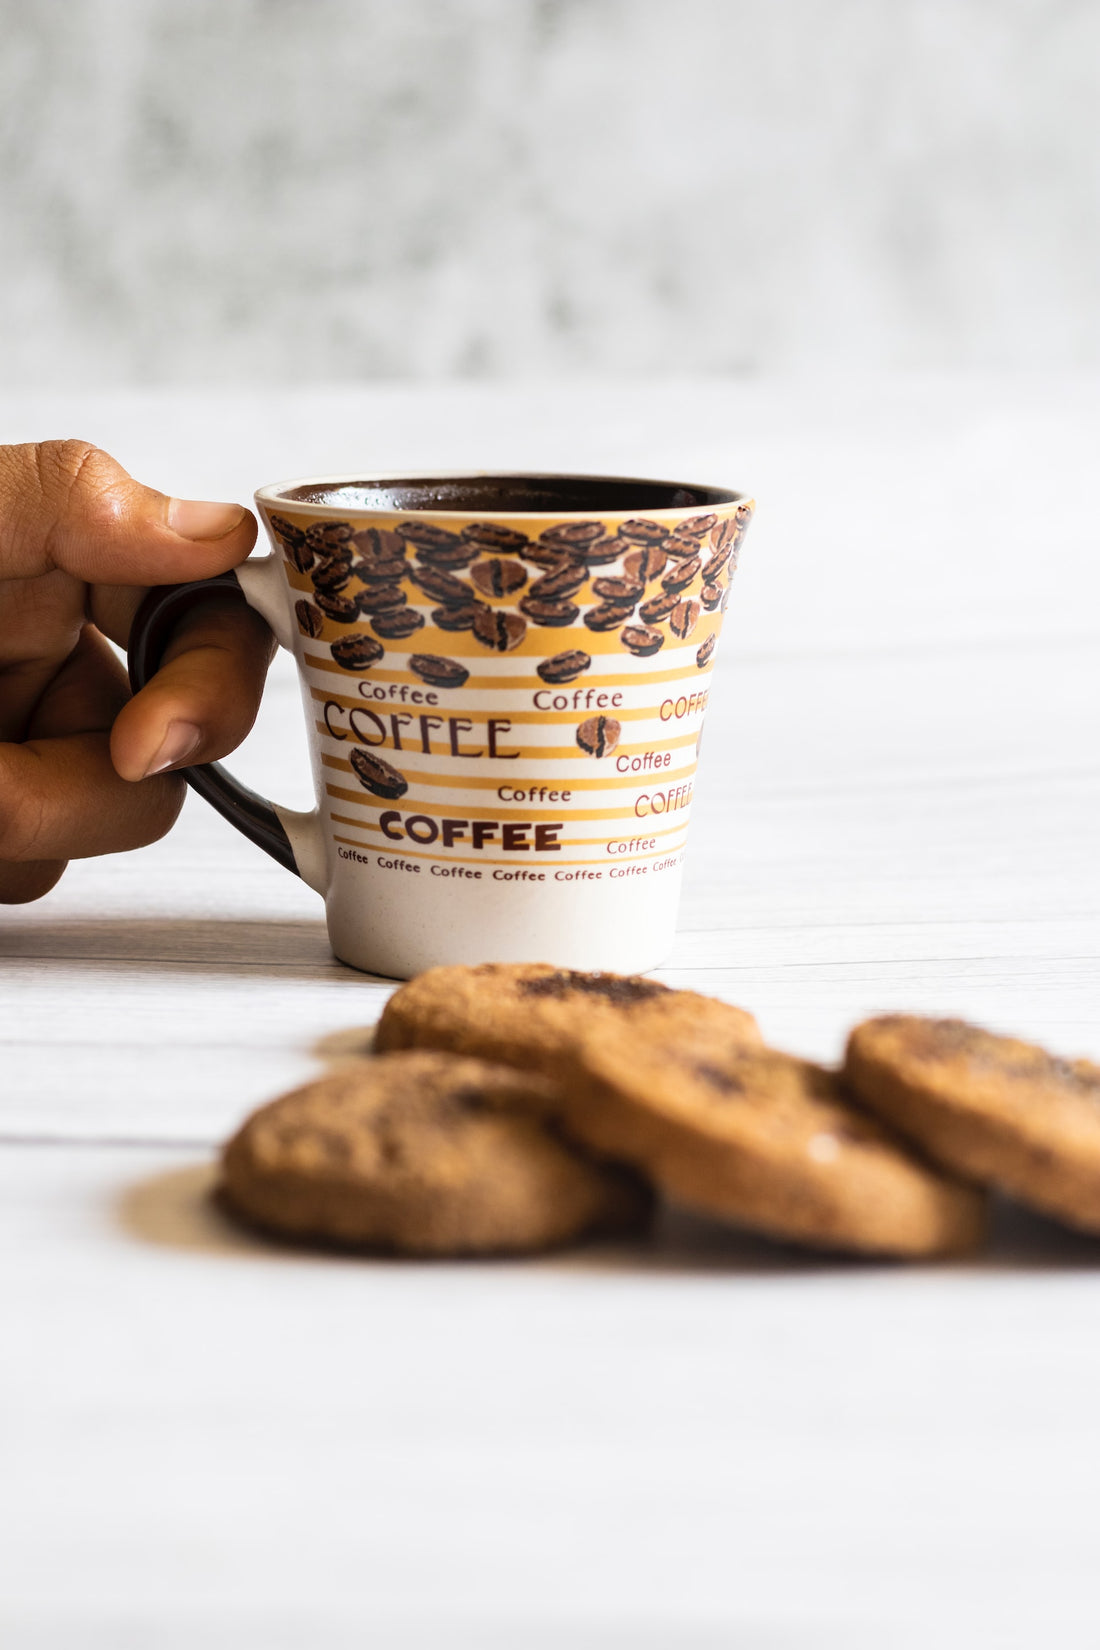 Morning Coffee Biscuits - The Coffee Connect